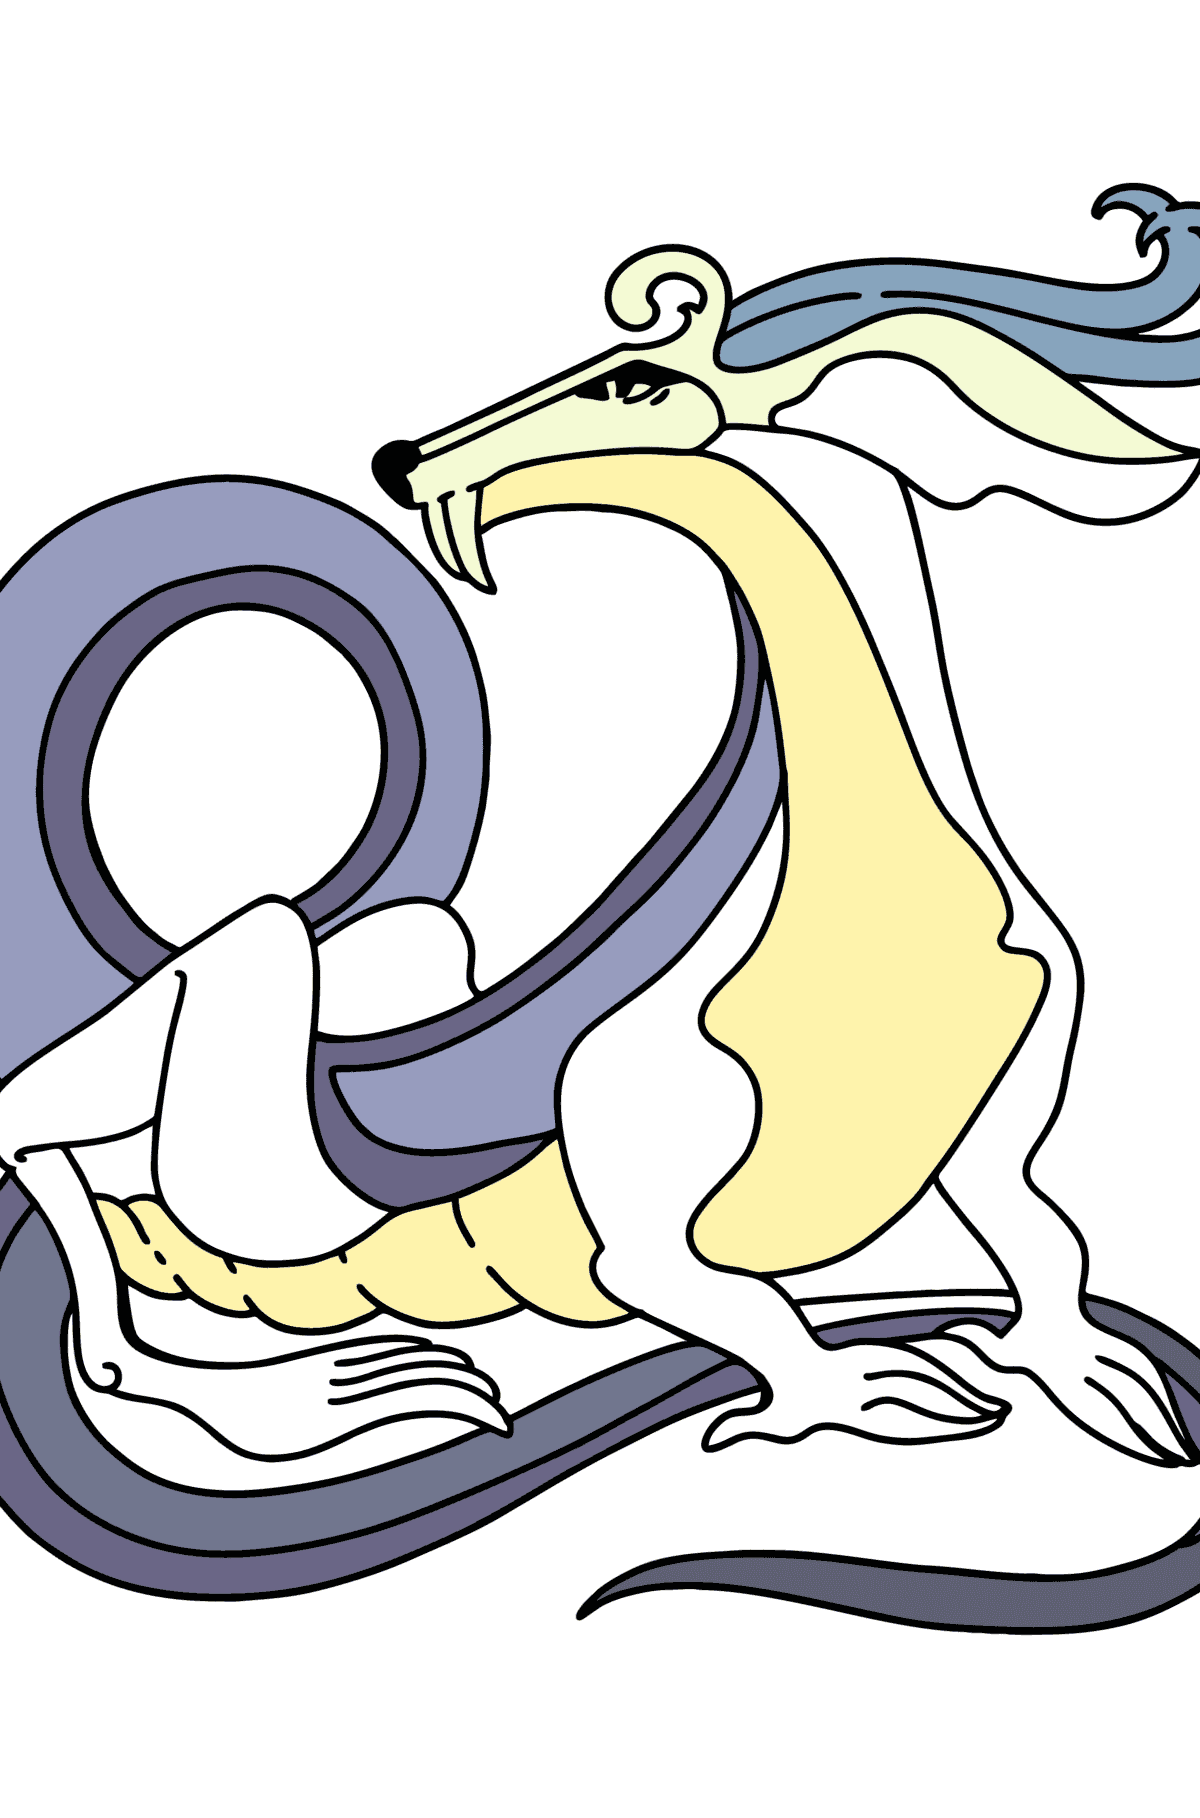 Calm Dragon coloring page - Coloring Pages for Kids